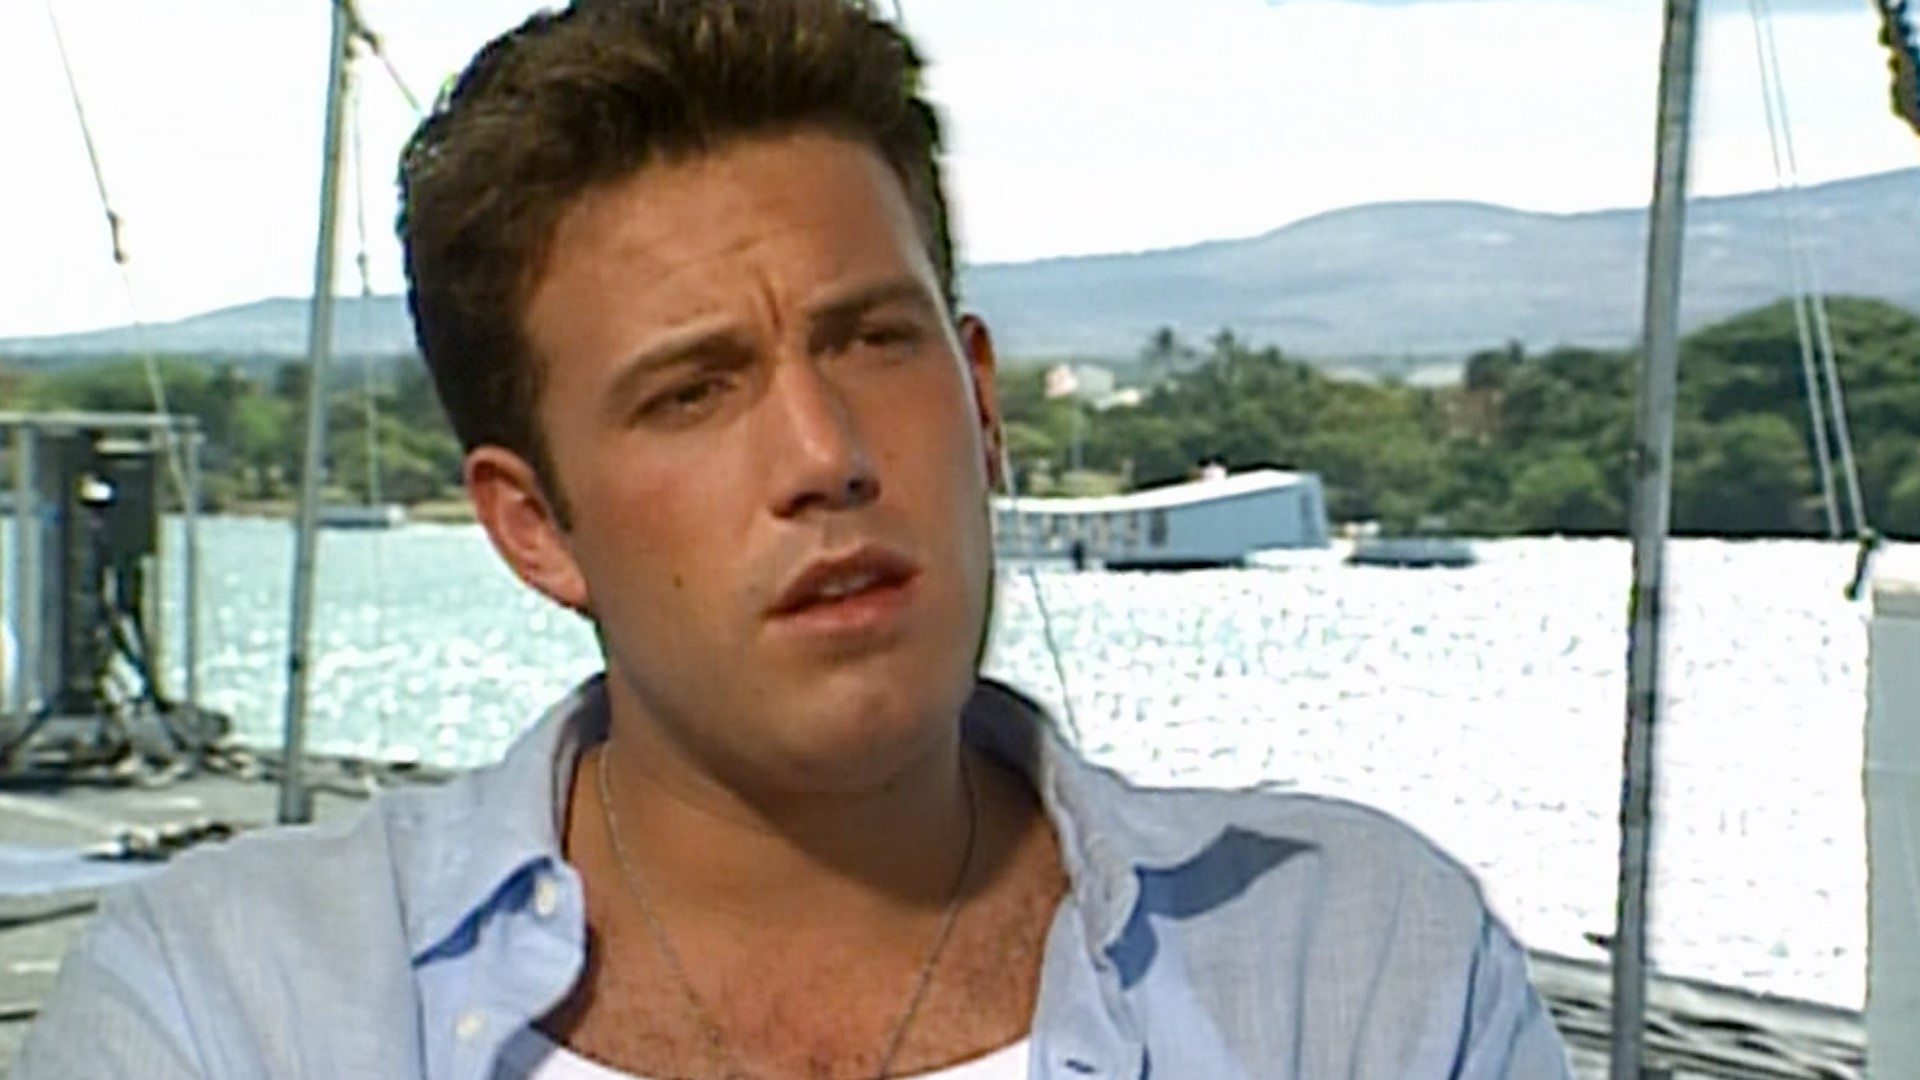 Ben Affleck sat down with WFAA to talk about taking on the role of Capt. Rafe McCawley in the 2001 film Pearl Harbor.